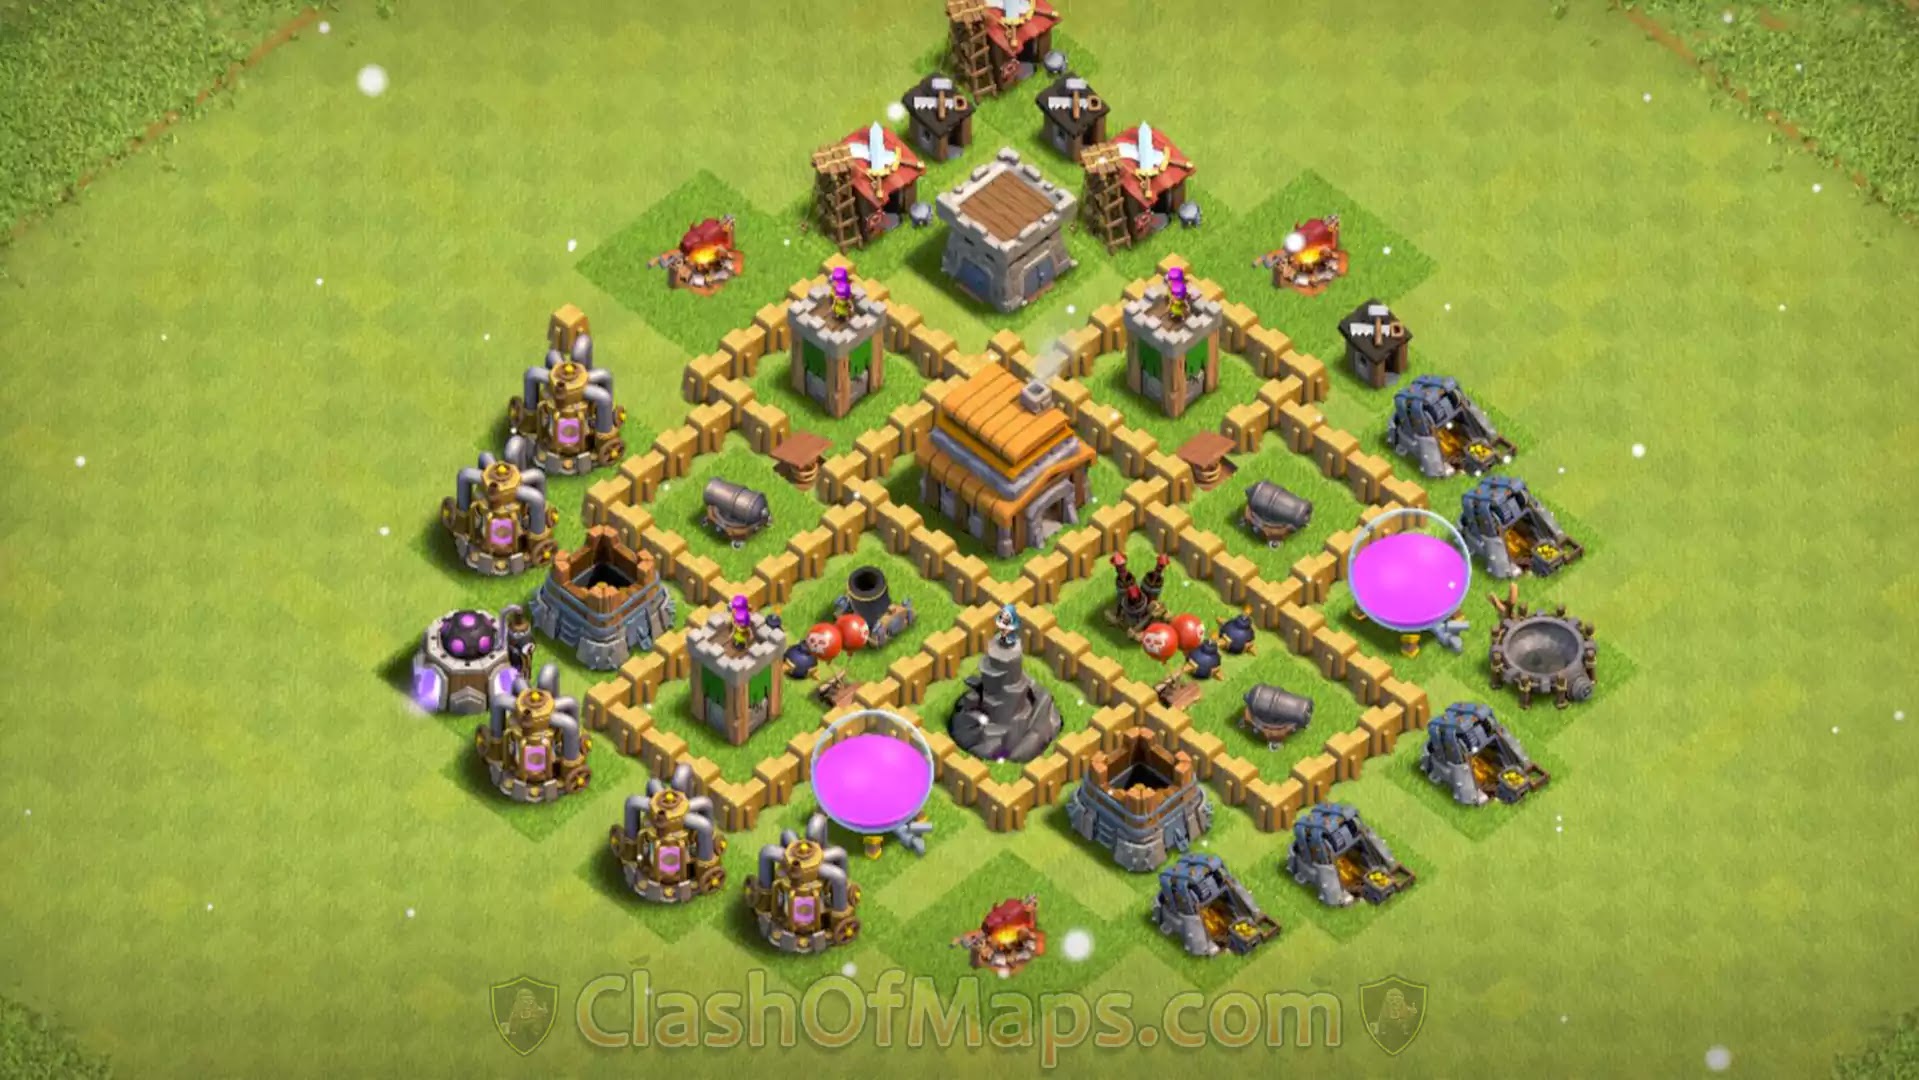 th5,th5 base,base for th5,th5 base layout,th5 base link,best th5 base,th5 war base,th5 coc base,th5 builder base,th5 farming base,th5 attack strategy,th5 layout,best army for th5,th5 defense base,best th5 war base,th5 base,base for th5,th5 base layout,th5 base link,best th5 base,th5 war base,th5 base design,th5 base trophy,th5 base farming,th5 base hybrid,th5 war base 2020,th5 base defense,th5 base 2020,best th5 war base,th5 trophy base,how to build a coc base,th5 base copy link,th5 base clash of clans,th5 base with link,th5 hybrid base 2020,th5 war base copy link,th5 farming base 2020,best th5 base design,th5 war base layout,best th5 base in the world,th5 base war,th5 trophy base link,how to make a coc base,th5 base in coc,th5 best base copy link,town hall 5,town hall 5 base,best town hall 5 base,town hall 5 clash of clans base,town hall 5 base link,layout for town hall 5,town hall 5 layout,best town hall level 5 base,town hall 5 war base,clash of clans town hall 5,town hall 5 defense base,town hall 5 builder base,best army for town hall 5,best town hall 5 war base,town hall 5 war base 2020,town hall 5 defense base link,town hall 5 attack strategy,best town hall 5 attack strategy,town hall 5 farming base,town hall 5 army,town hall 5 trophy base,town hall 5 hybrid base,town hall 5 setup,town hall 5 best defense,town hall 5 base with link,best town hall five base,town hall 5 night base,town hall 5 max base,best max town hall 5 base,town hall 5 pack,town hall 5 base,best town hall 5 base,th5 war base,th5 base link,th5 base layout,clash of clans town hall 5 base,best th5 base,coc th5 base,th5 builder base,coc town hall 5 base,coc builder base th5,town hall 5 war base,clash of clans town hall 5,town hall 5 best base,clash of clans th5 base,coc town hall 5,town hall 5 layout,town hall 5 defense base link,town hall 5 base best defense,th5 best base,coc th5,best layout for town hall 5,town hall 5 defense base,best th 5,th5 layout